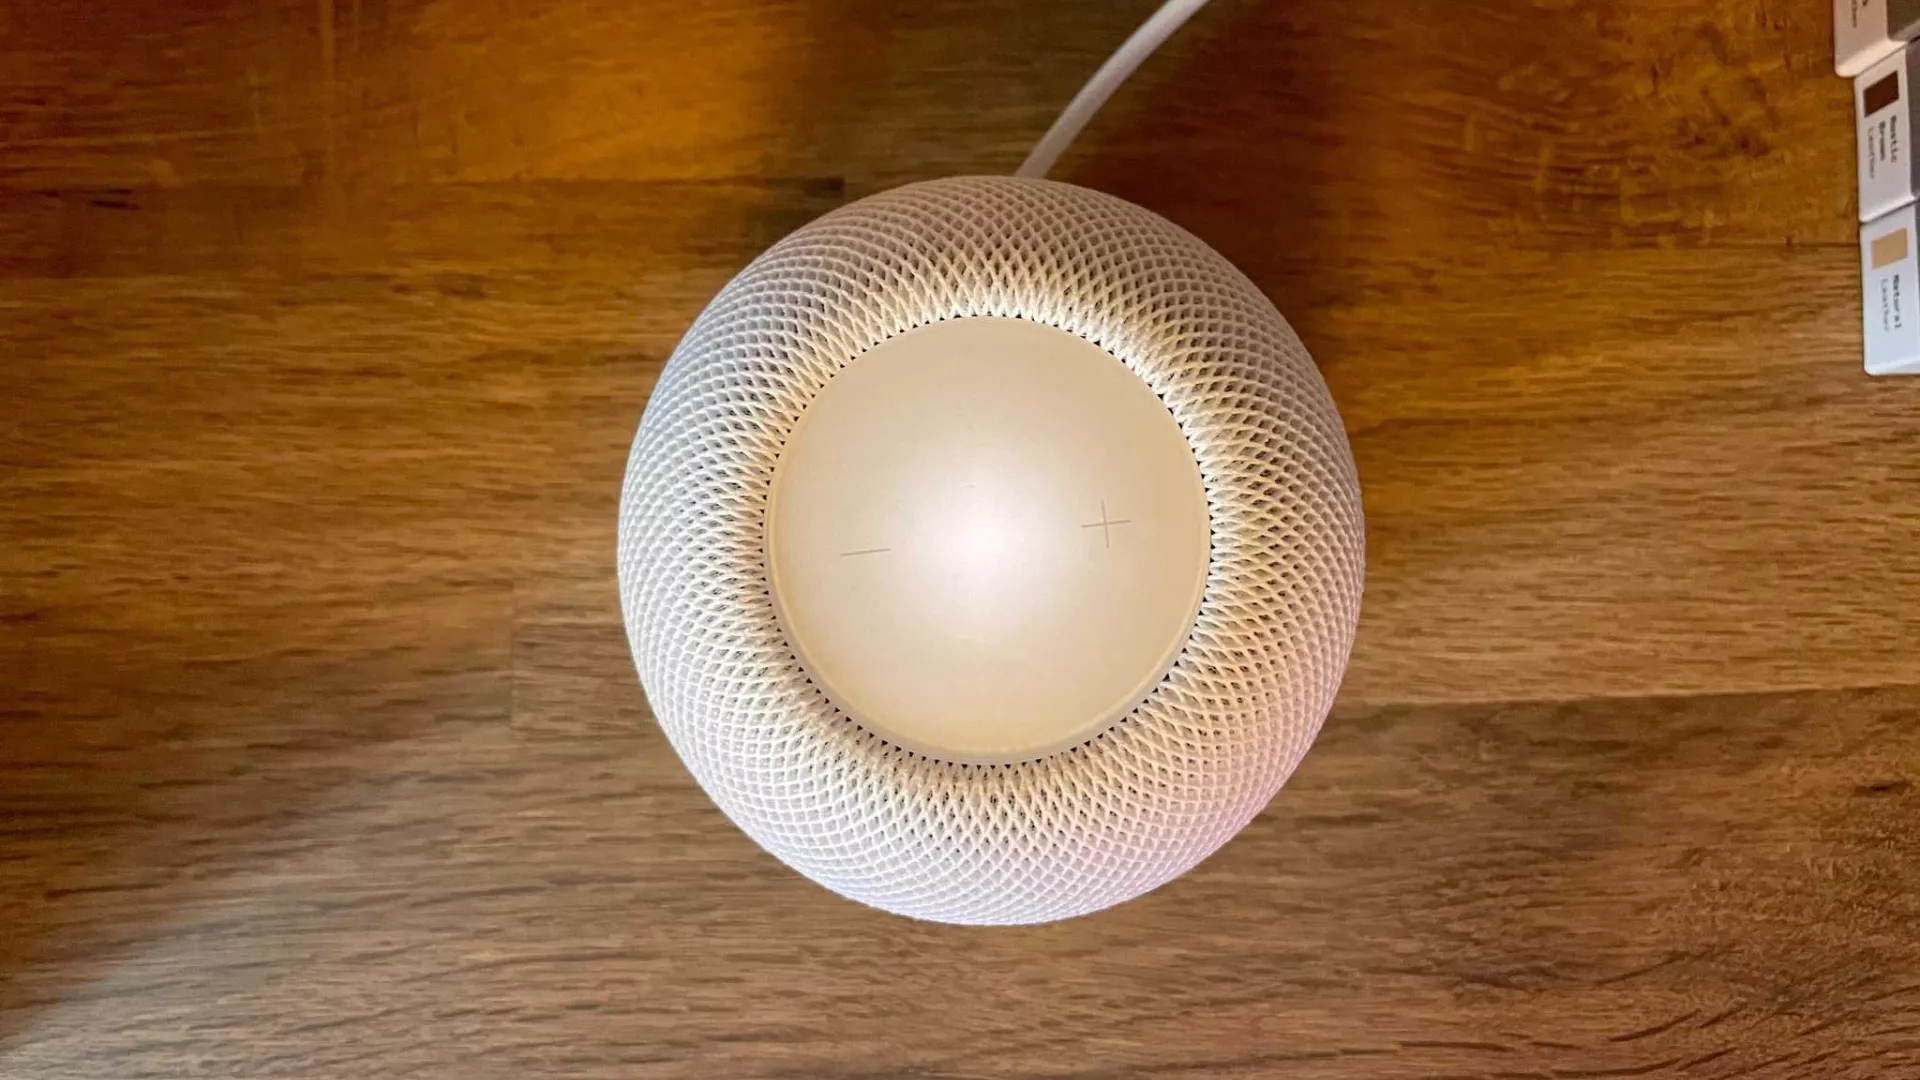 A white HomePod mini on a wooden surface with the touch panel illuminated